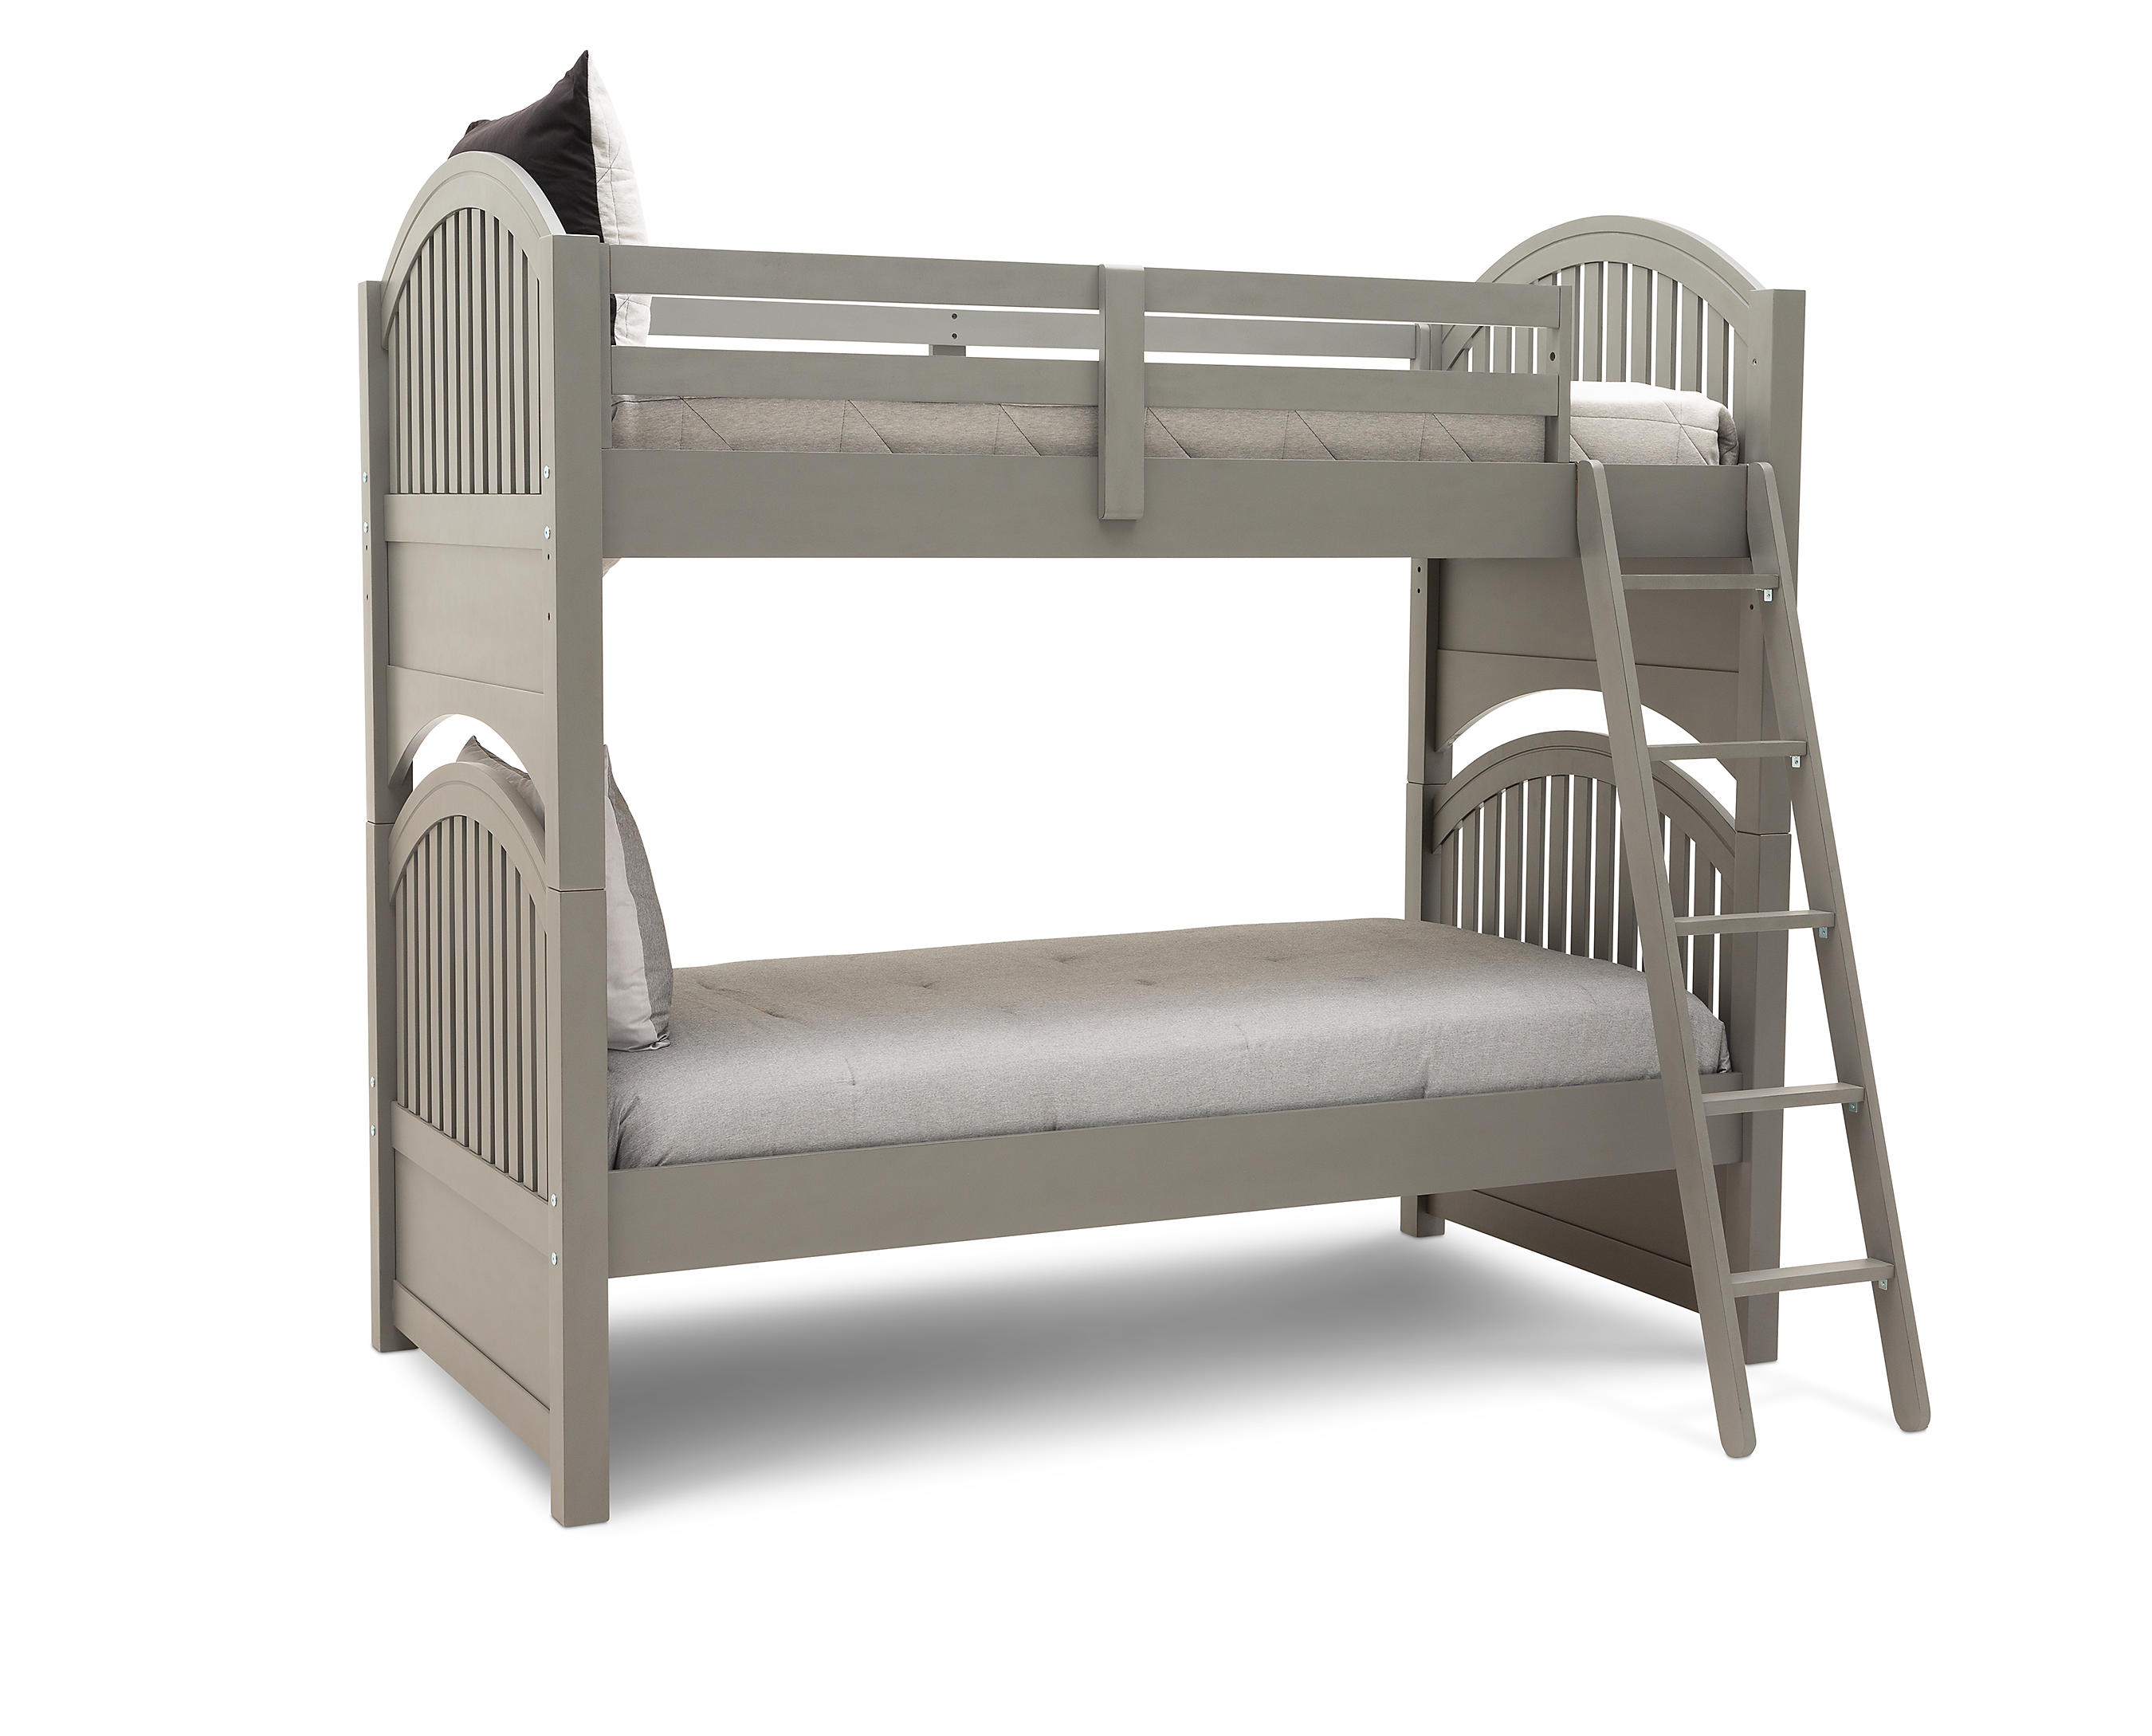 Lake House Bunk Bed Furniture Row, Furniture Row Bunk Beds